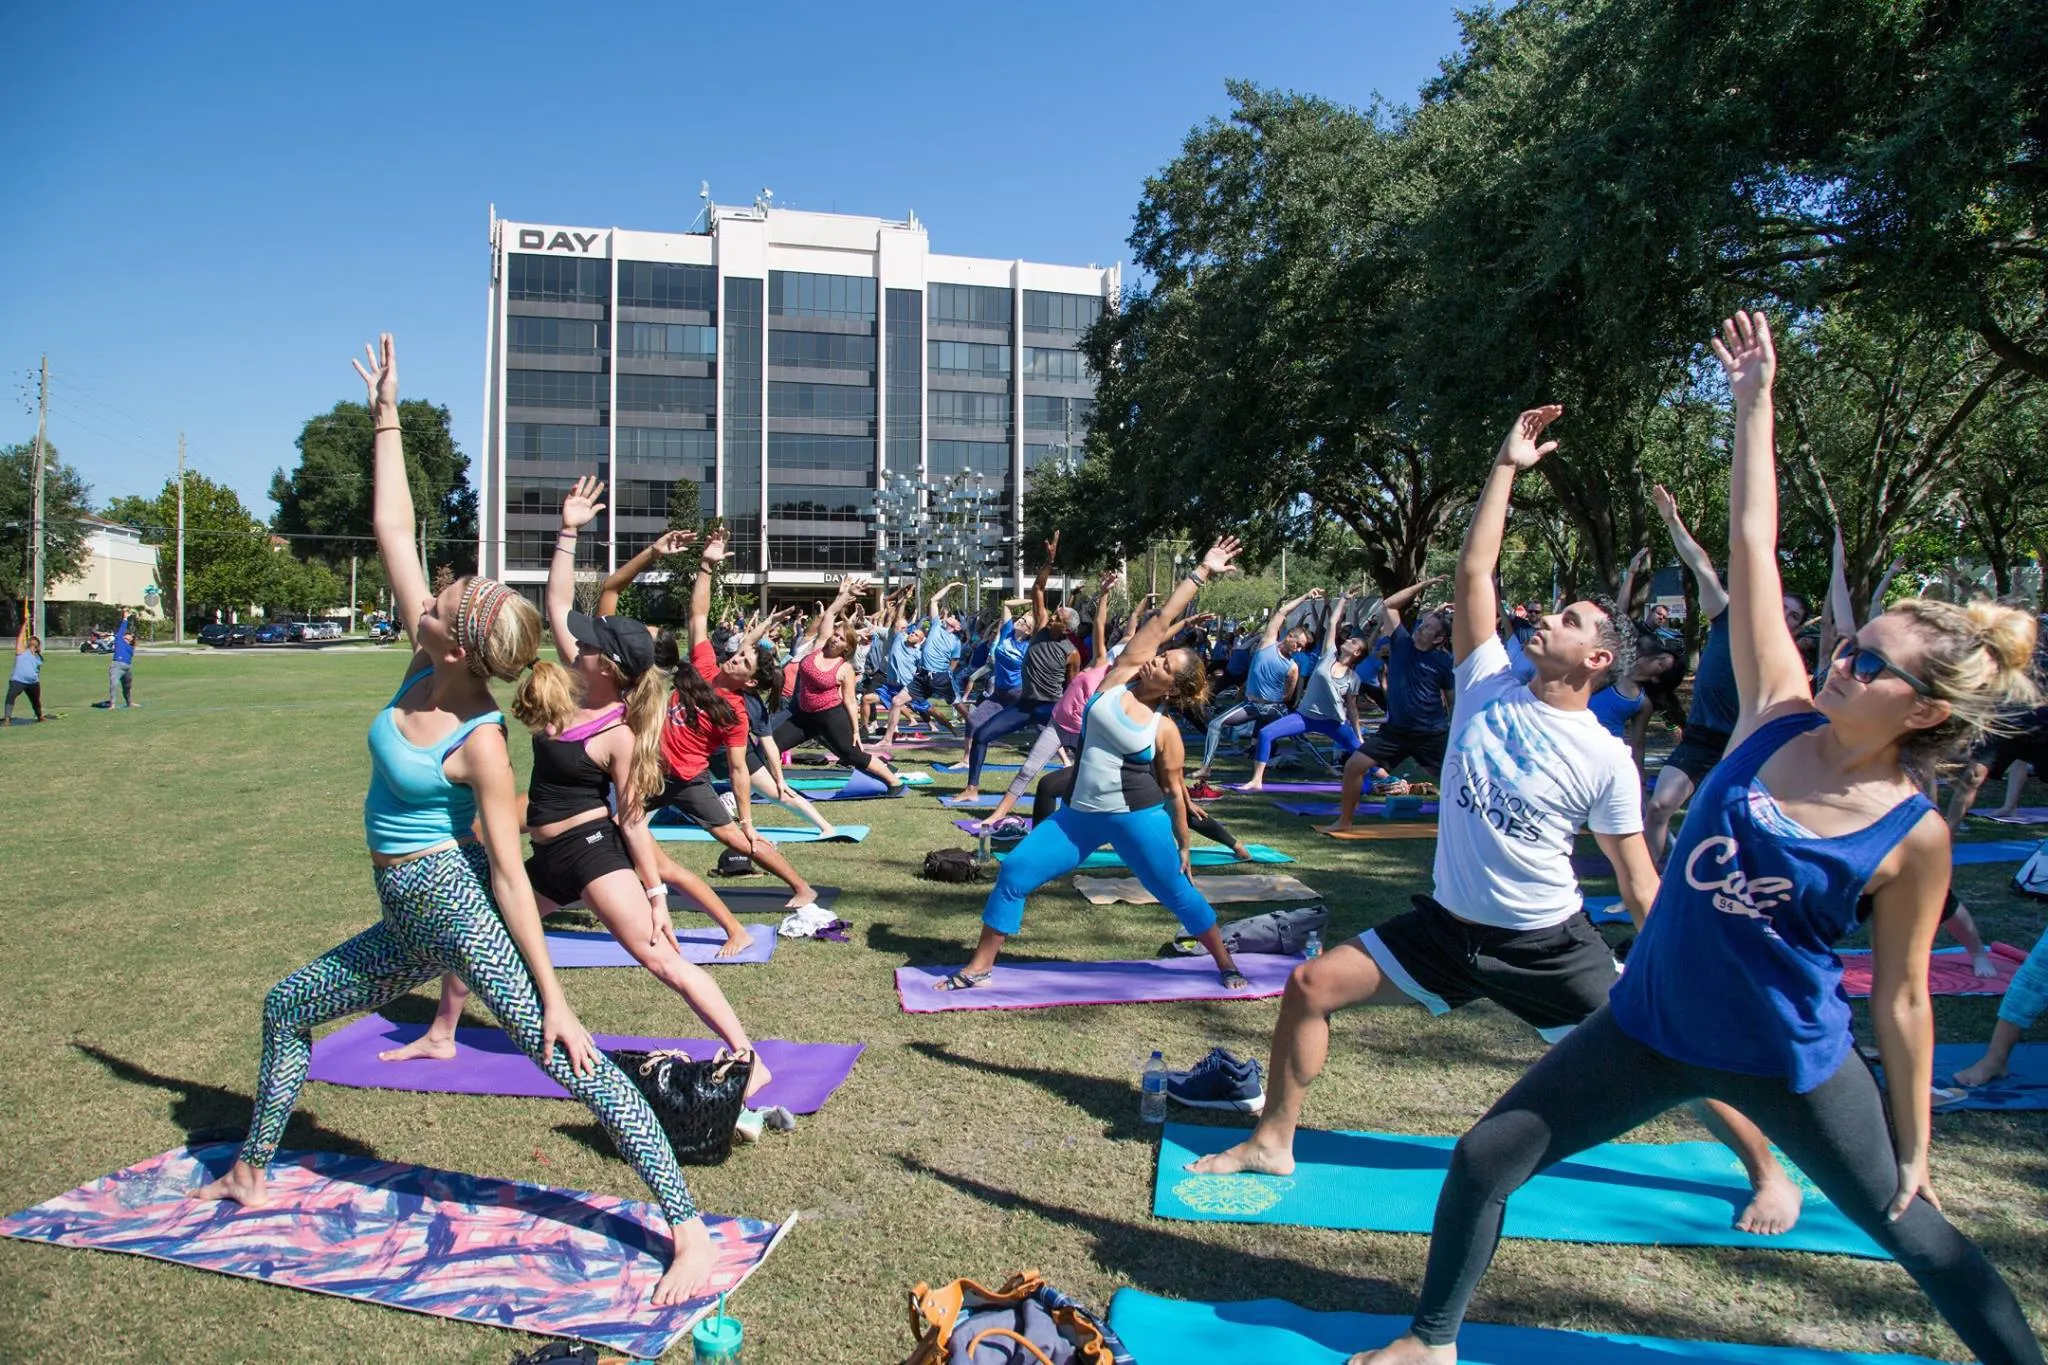 Outdoor yoga things to do in Orlando besides theme parks